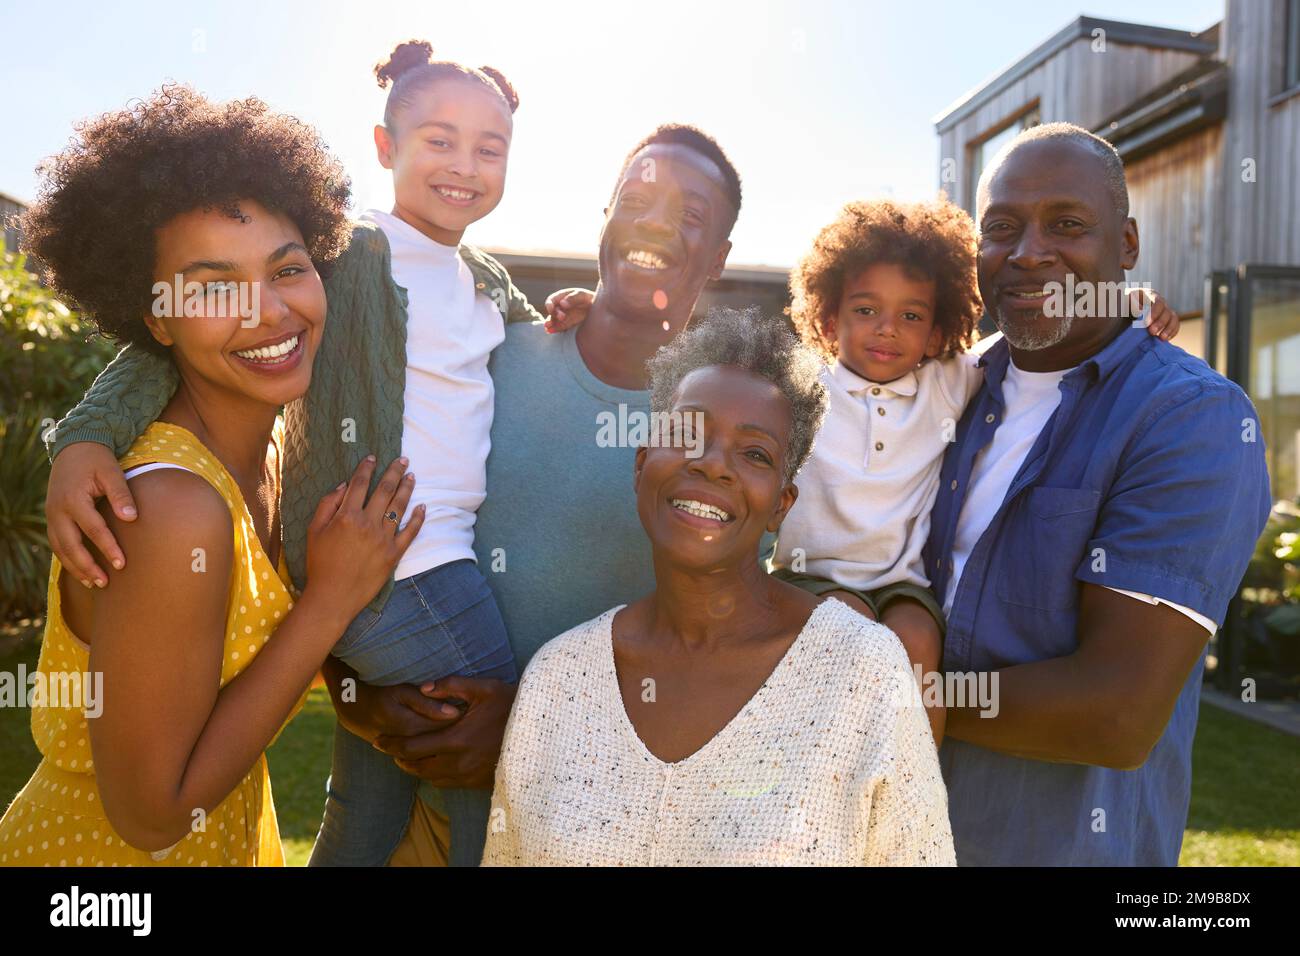 Portrait Of Multi-Generation Family Outdoors In Garden At Home Stock Photo